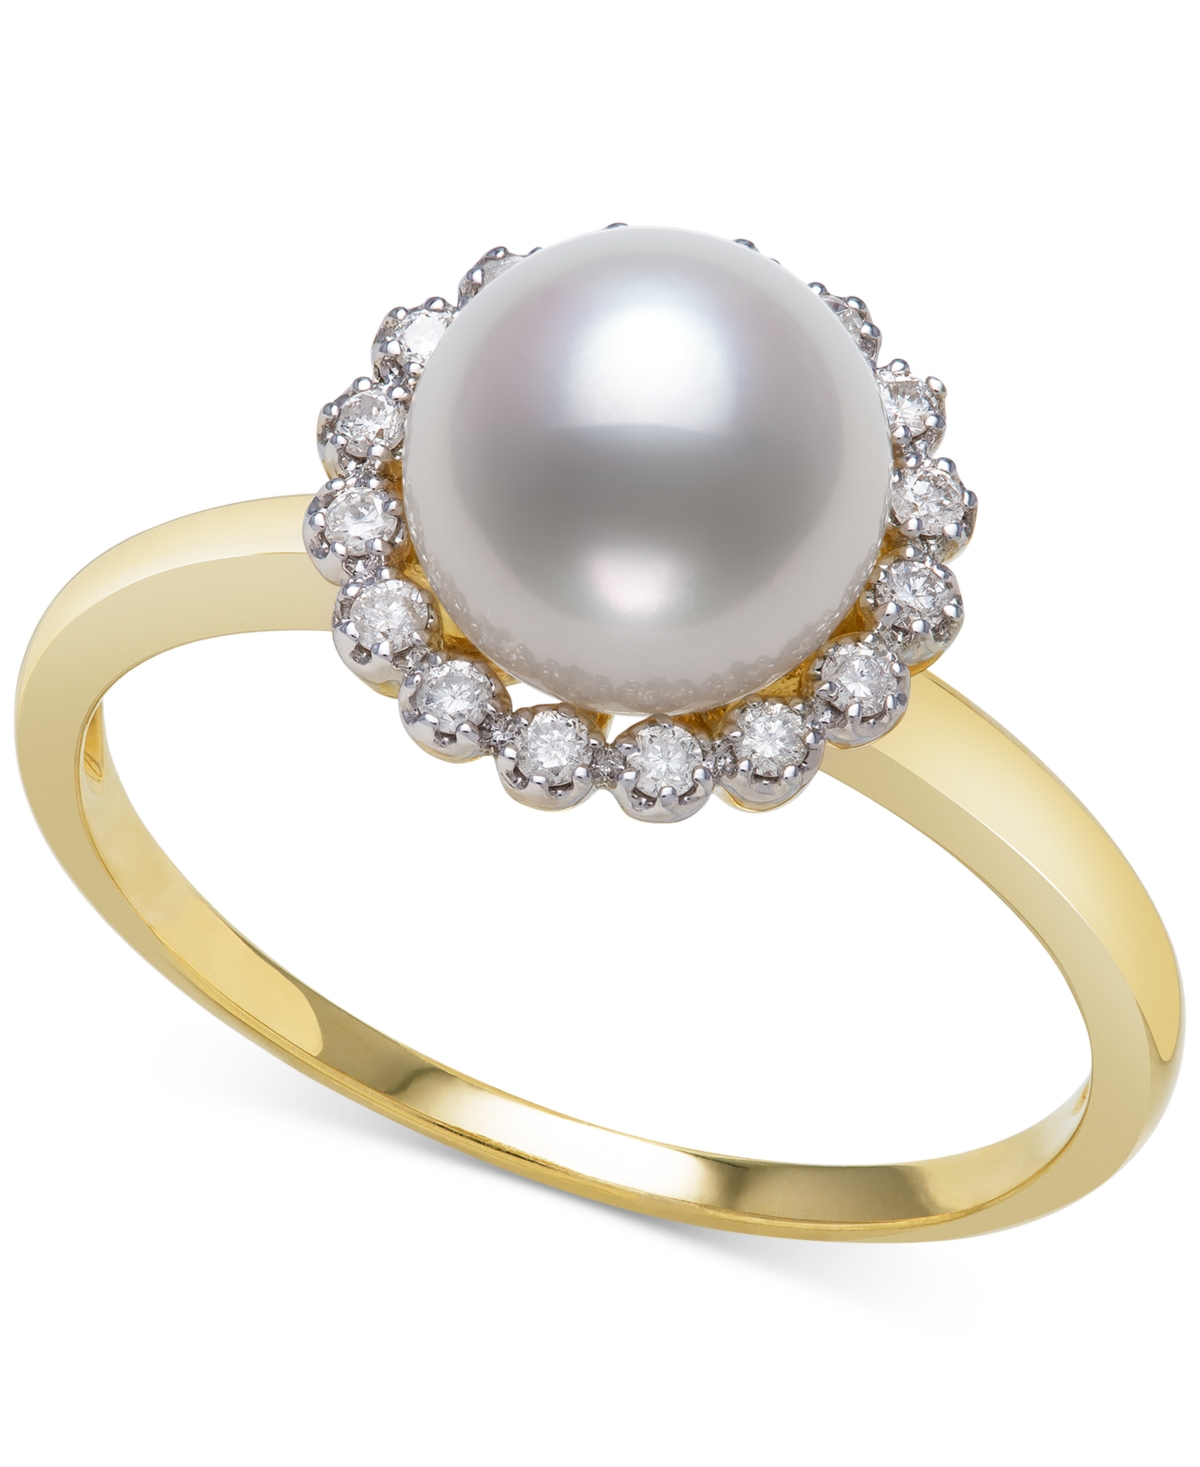 Belle de Mer Cultured Freshwater Pearl (7mm) & Diamond (1/8 ct. t.w.) Halo Ring in 14k Gold, Created for Macy's